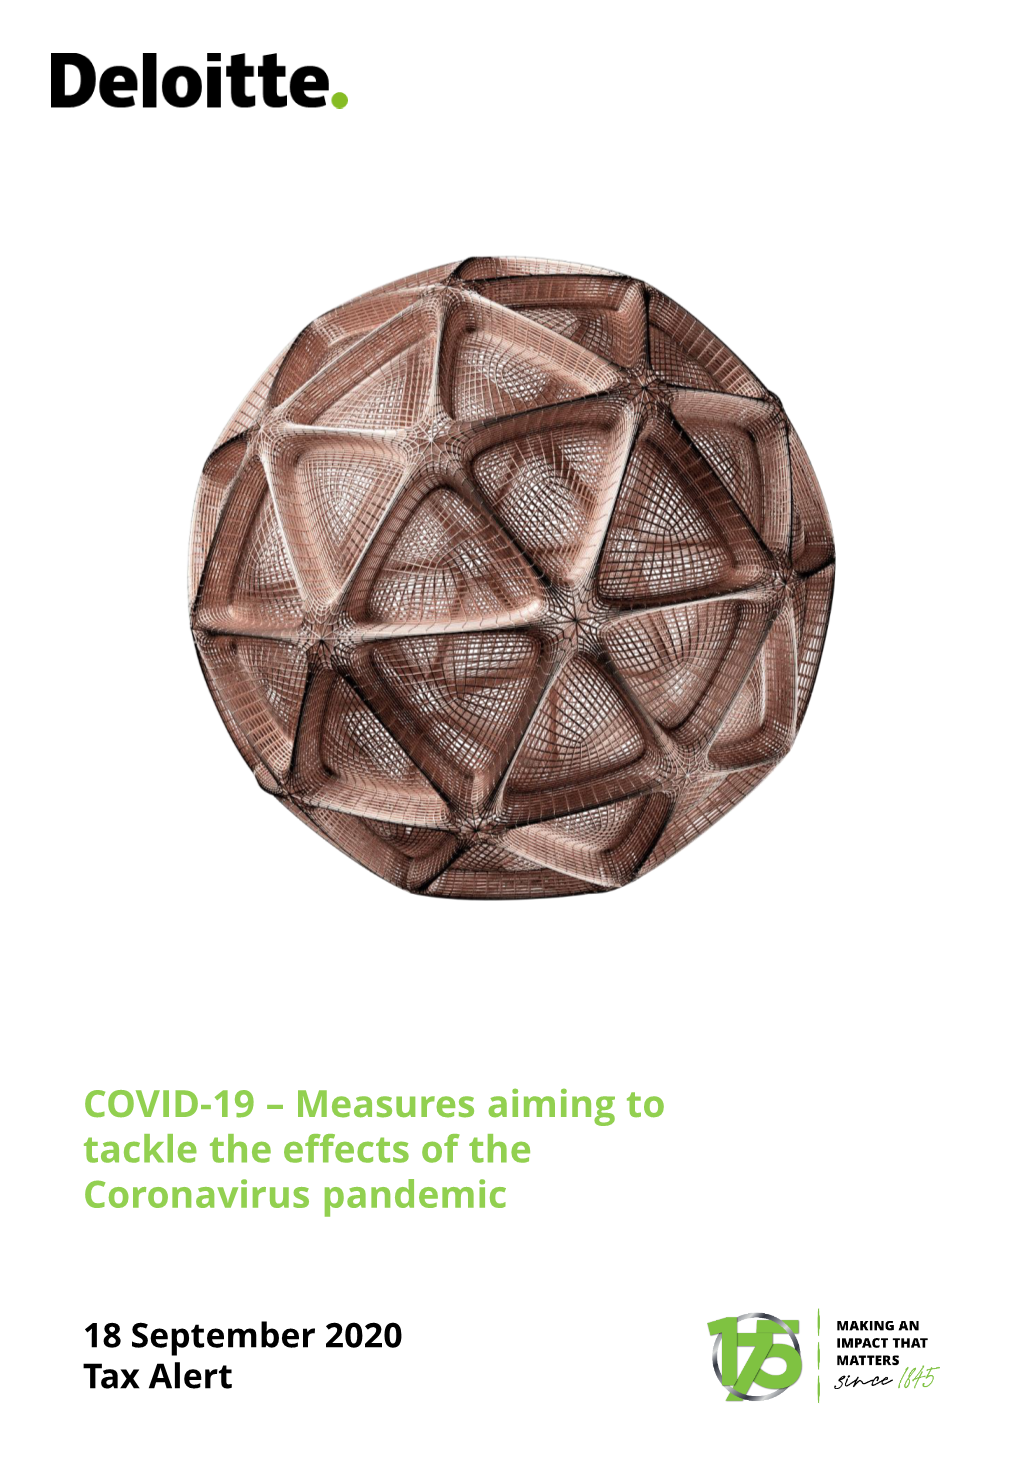 COVID-19 – Measures Aiming to Tackle the Effects of the Coronavirus Pandemic